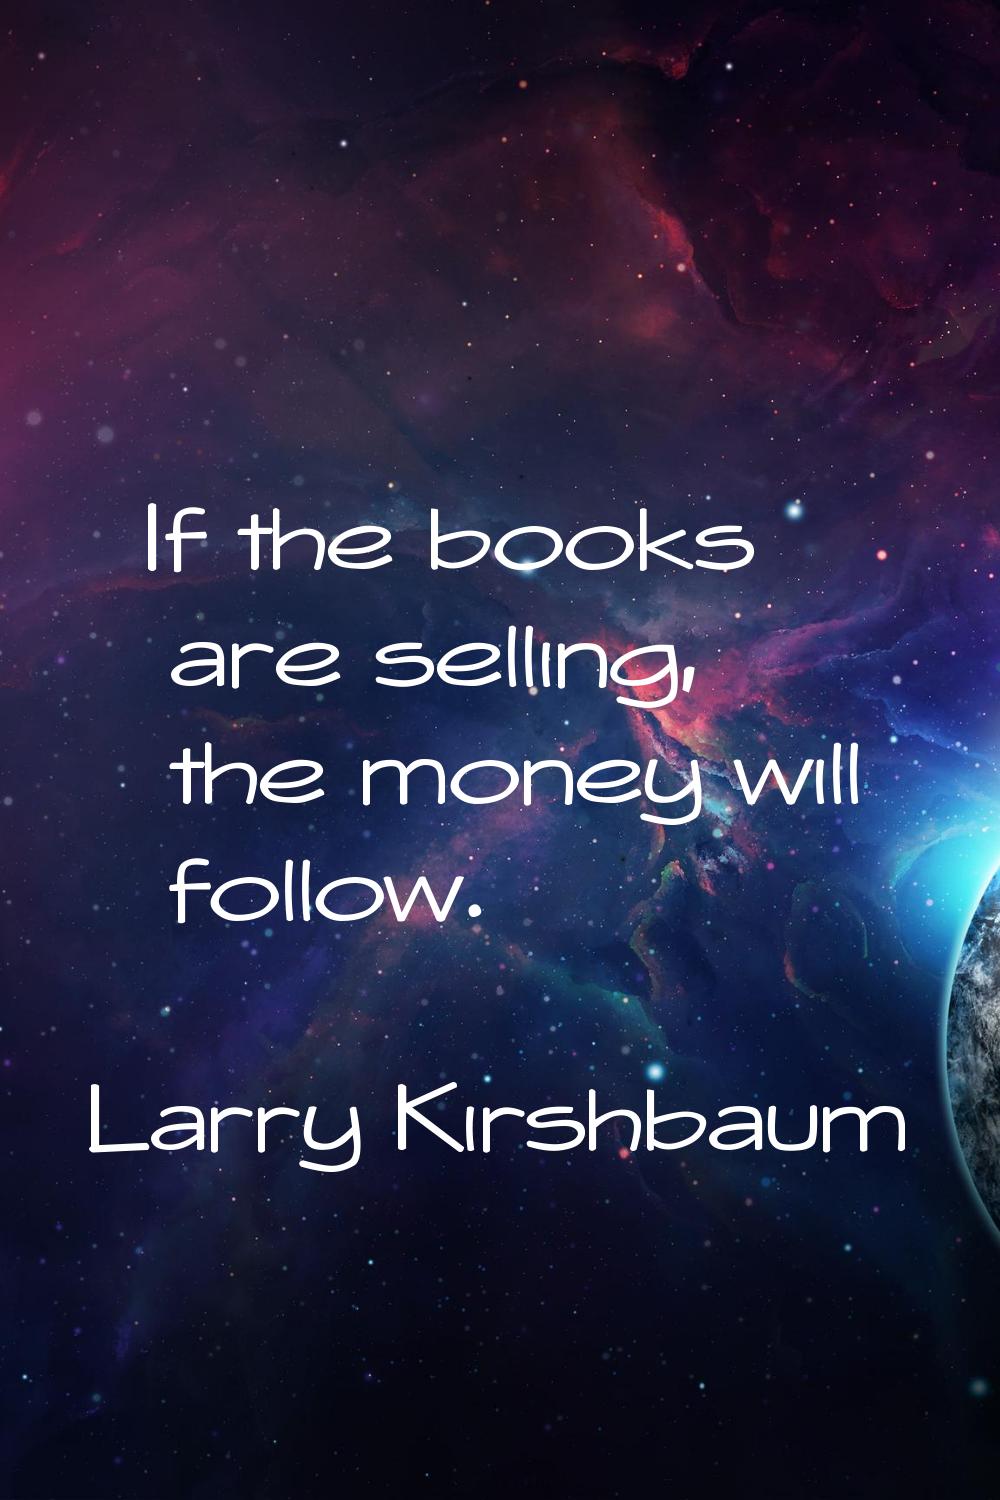 If the books are selling, the money will follow.